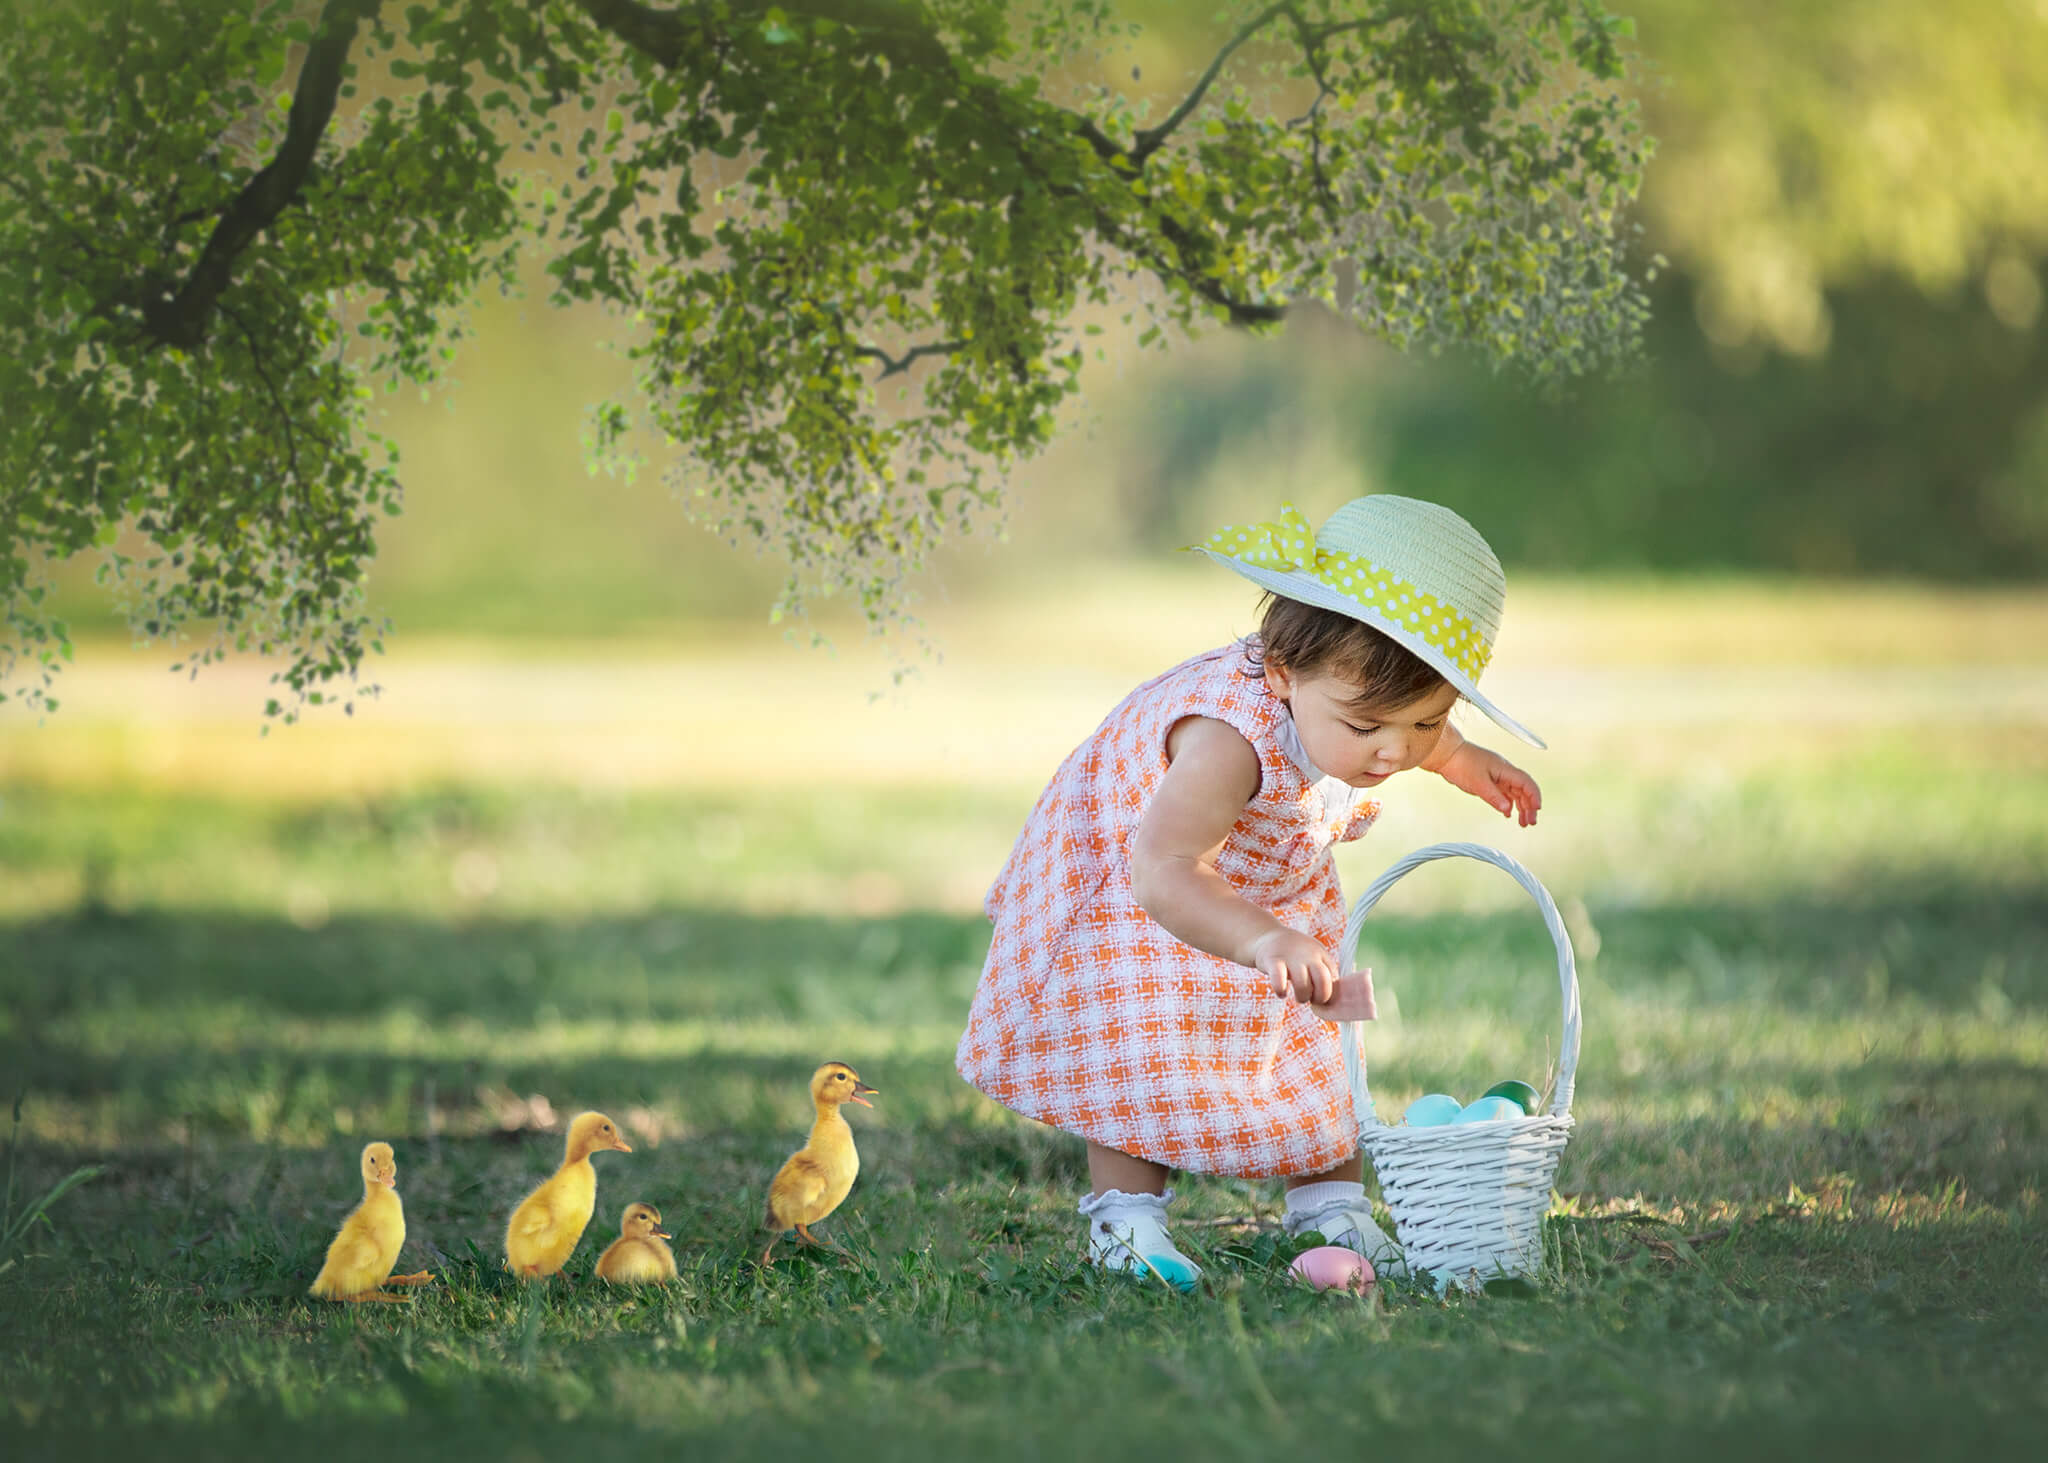 Little girl in Janie and Jack dress with ducklings photographed by LA photographer